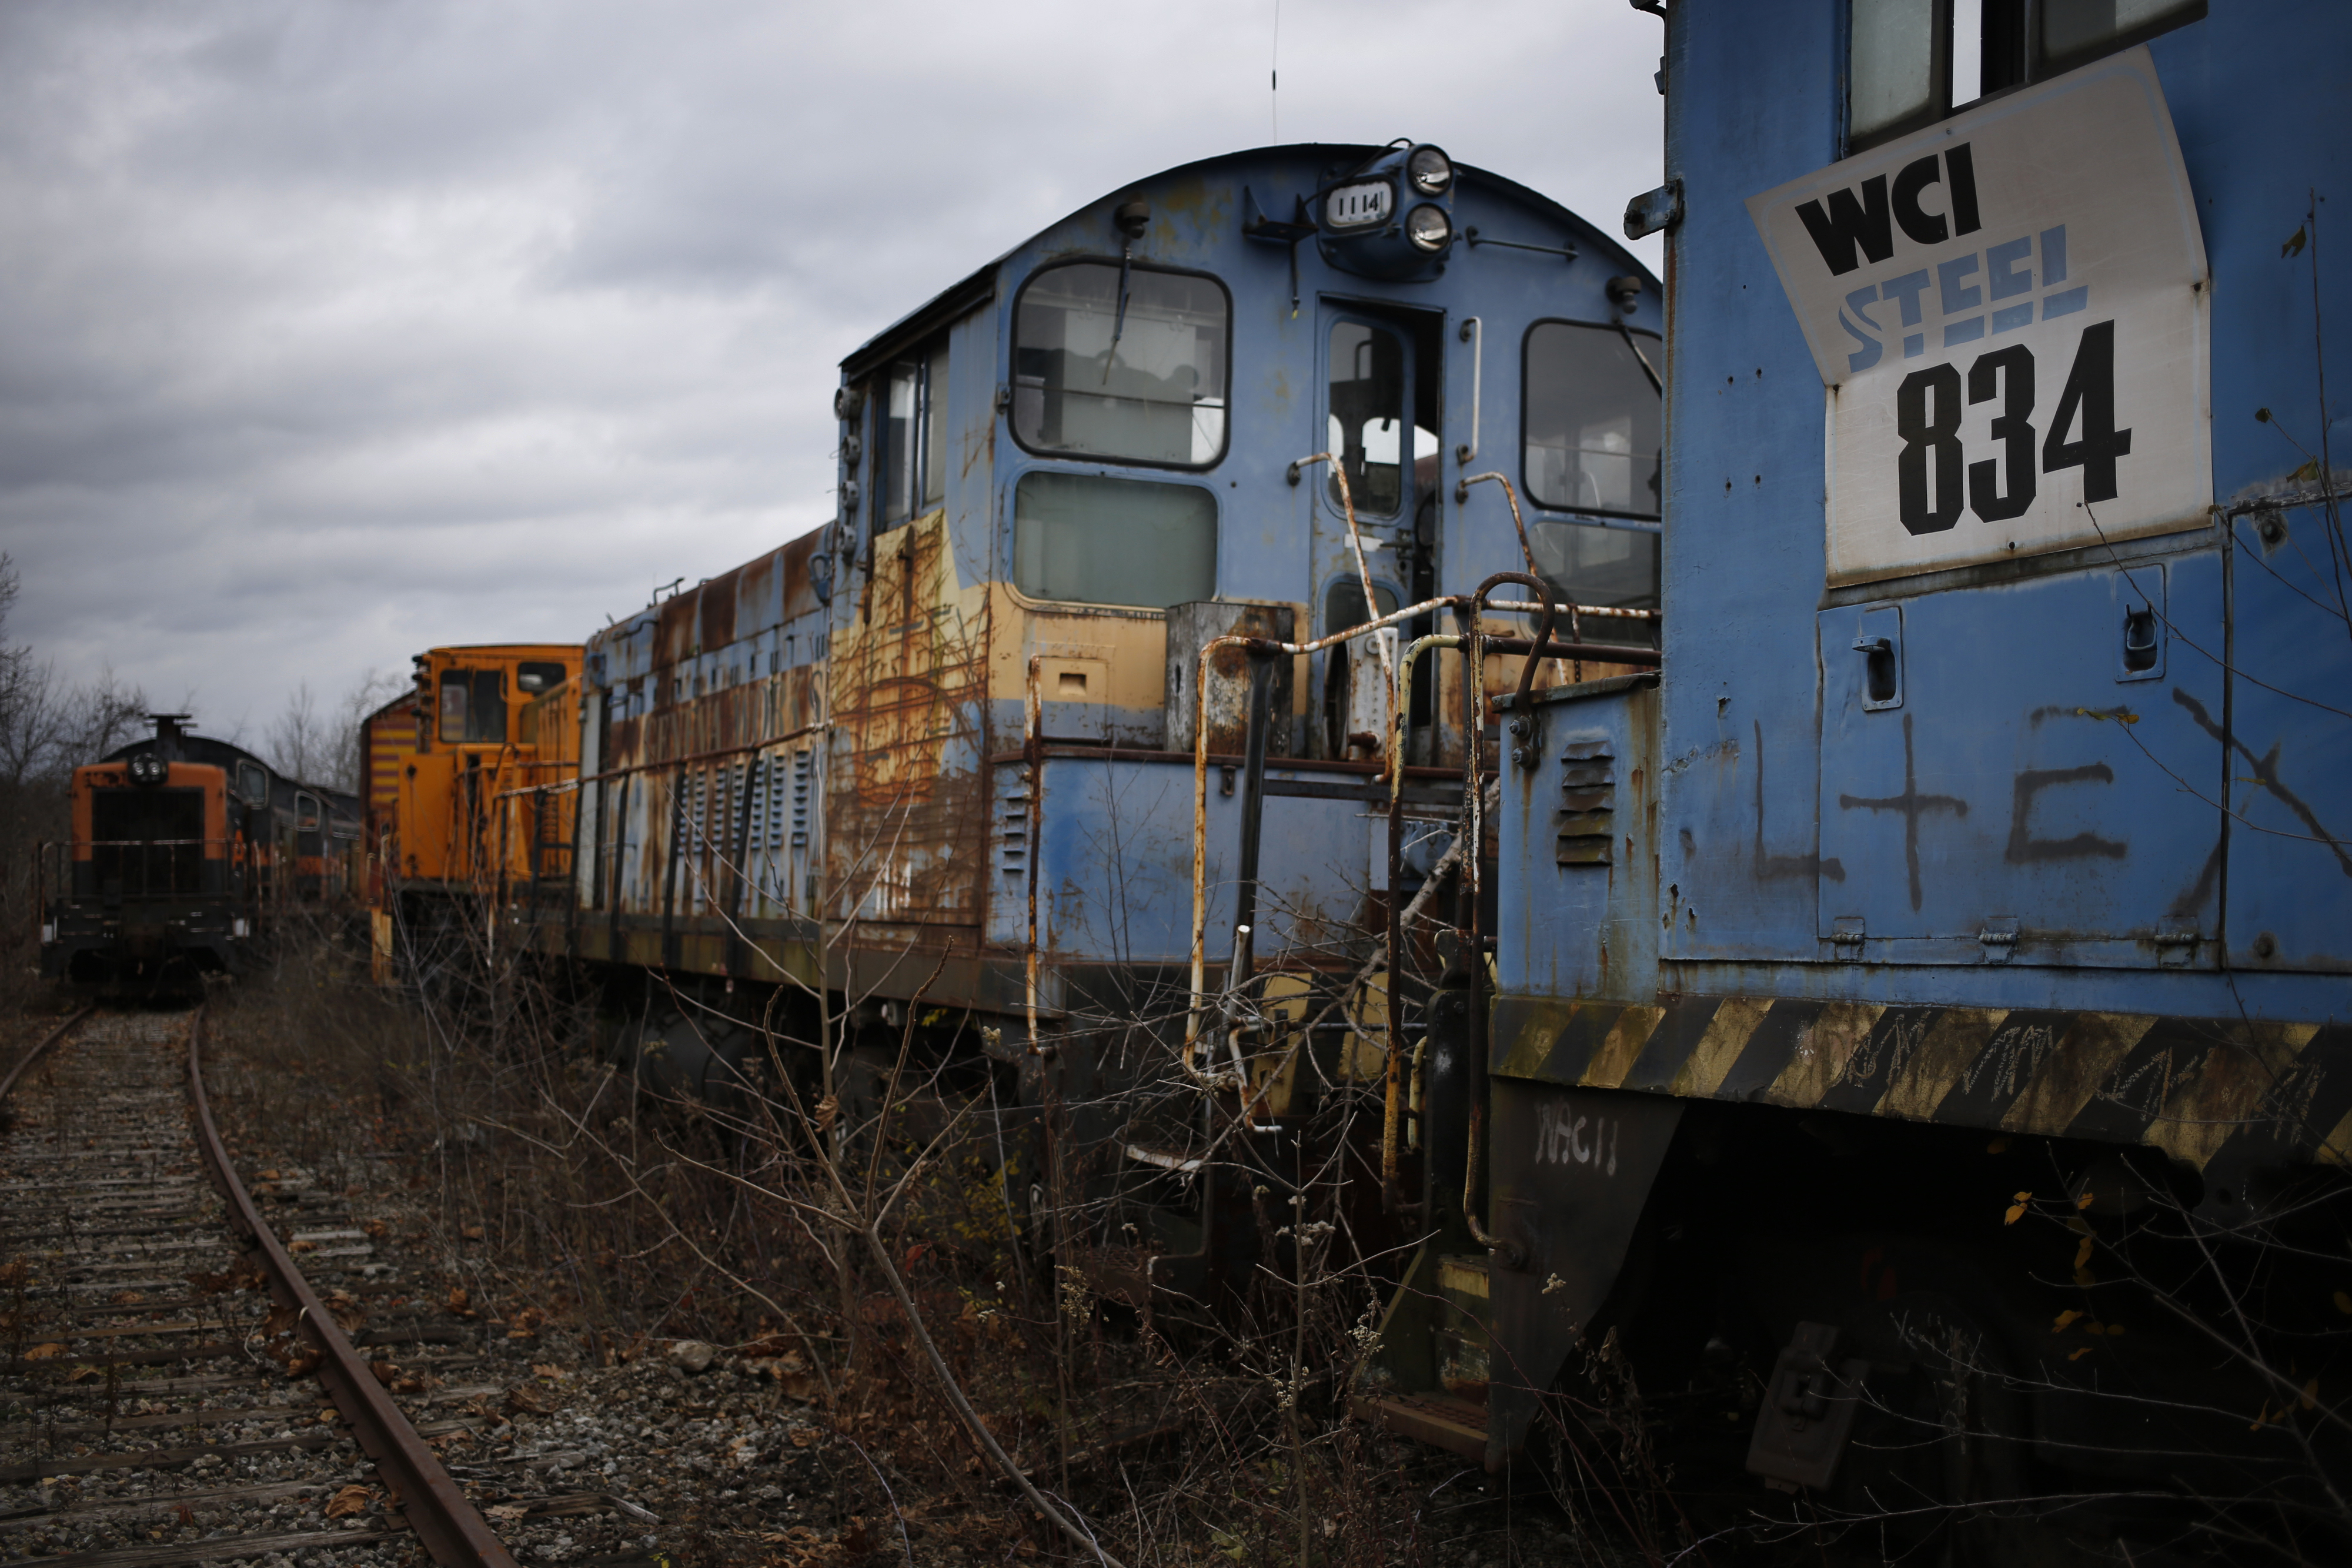 Abandoned switching locomotives sit parked on the grounds of the former U.S. Steel McDonald Works steel mill near Youngstown in Campbell, Ohio, U.S., on Tuesday, Dec. 1, 2016. (Luke Sharrett&mdash;Bloomberg / Getty Images)